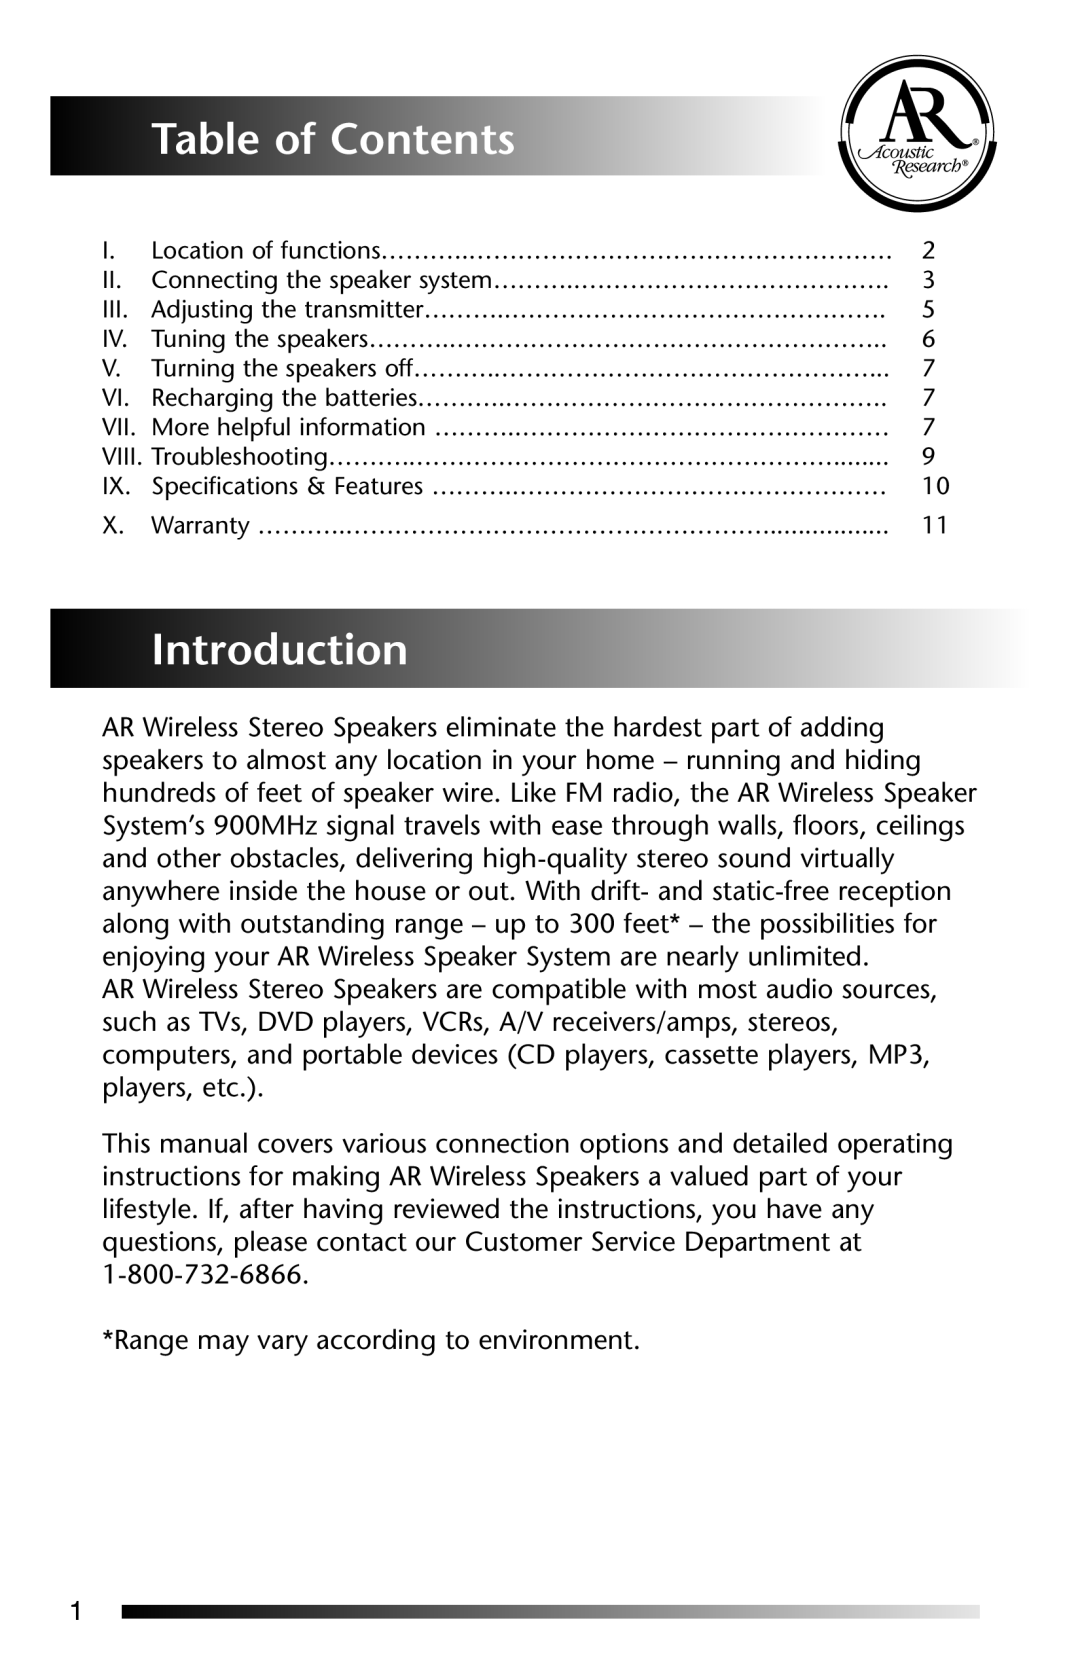 Acoustic Research AW-871 operation manual Table of Contents, Introduction 